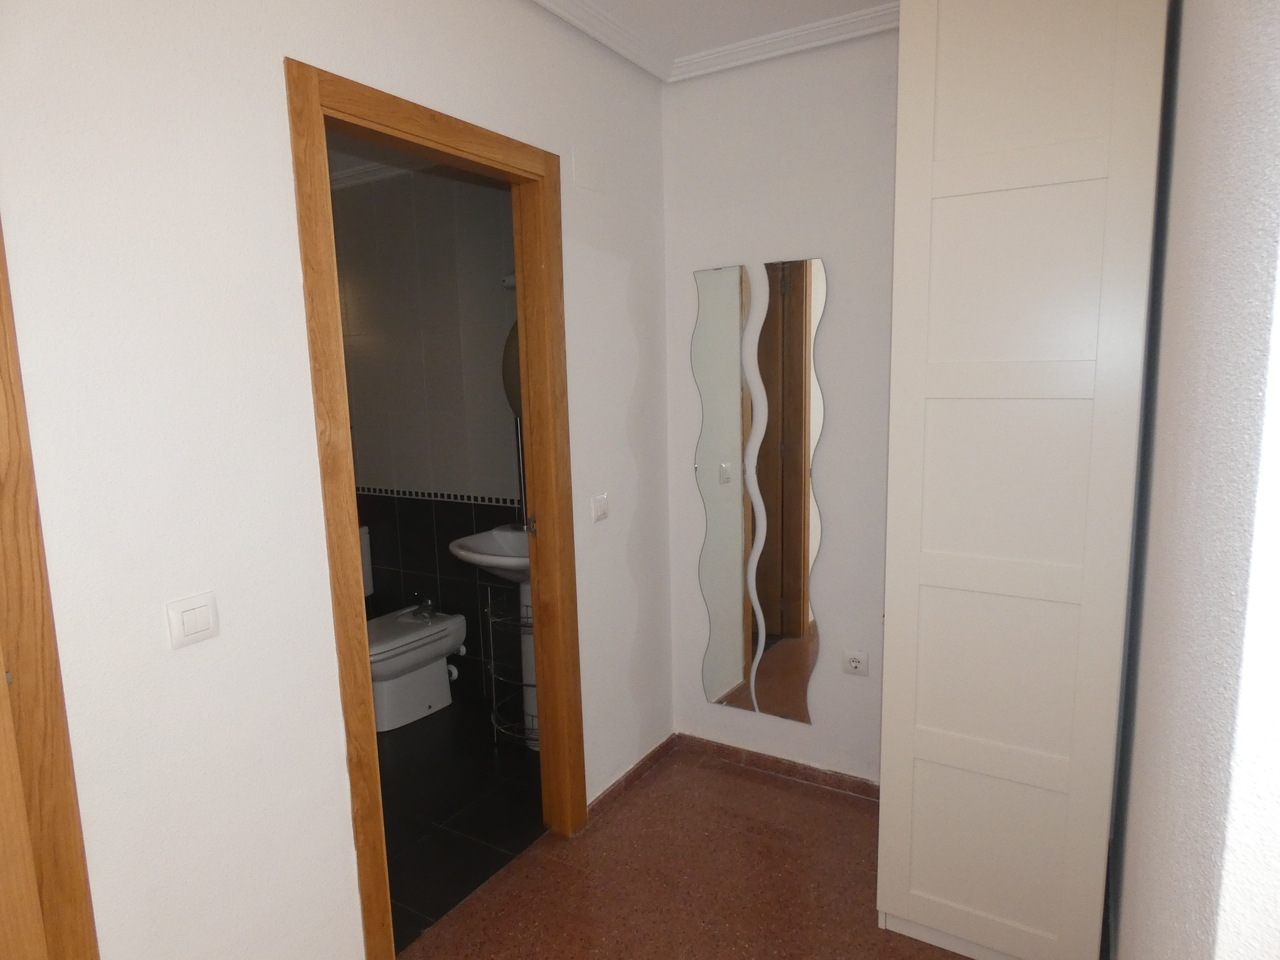 HCB-523: Apartments for sale in Almoradi